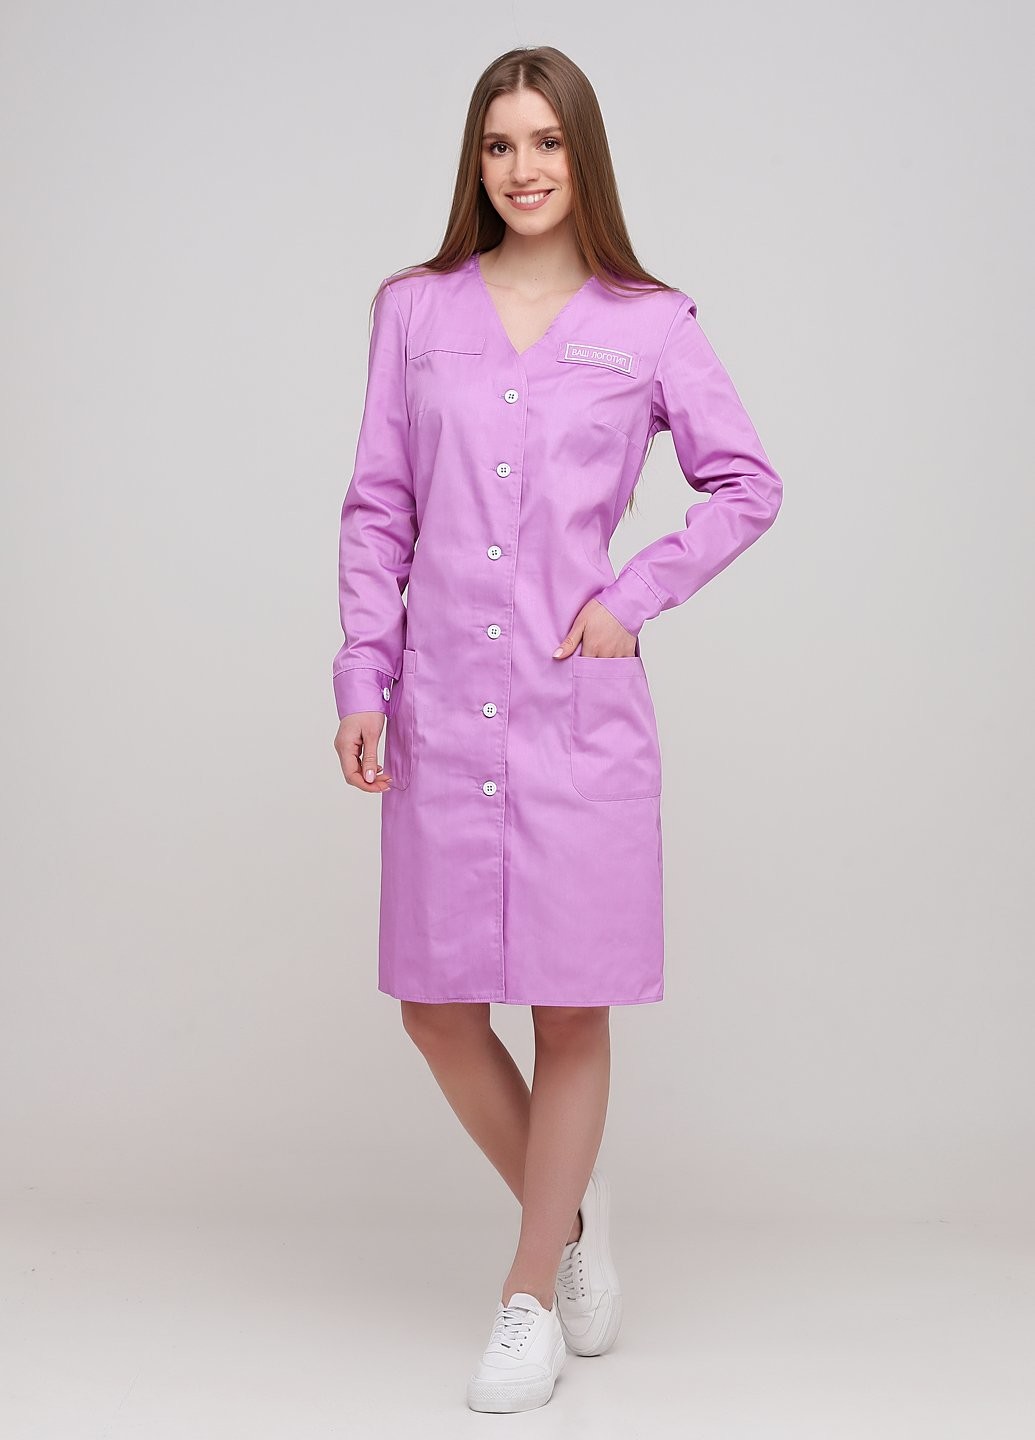 Working gowns for women